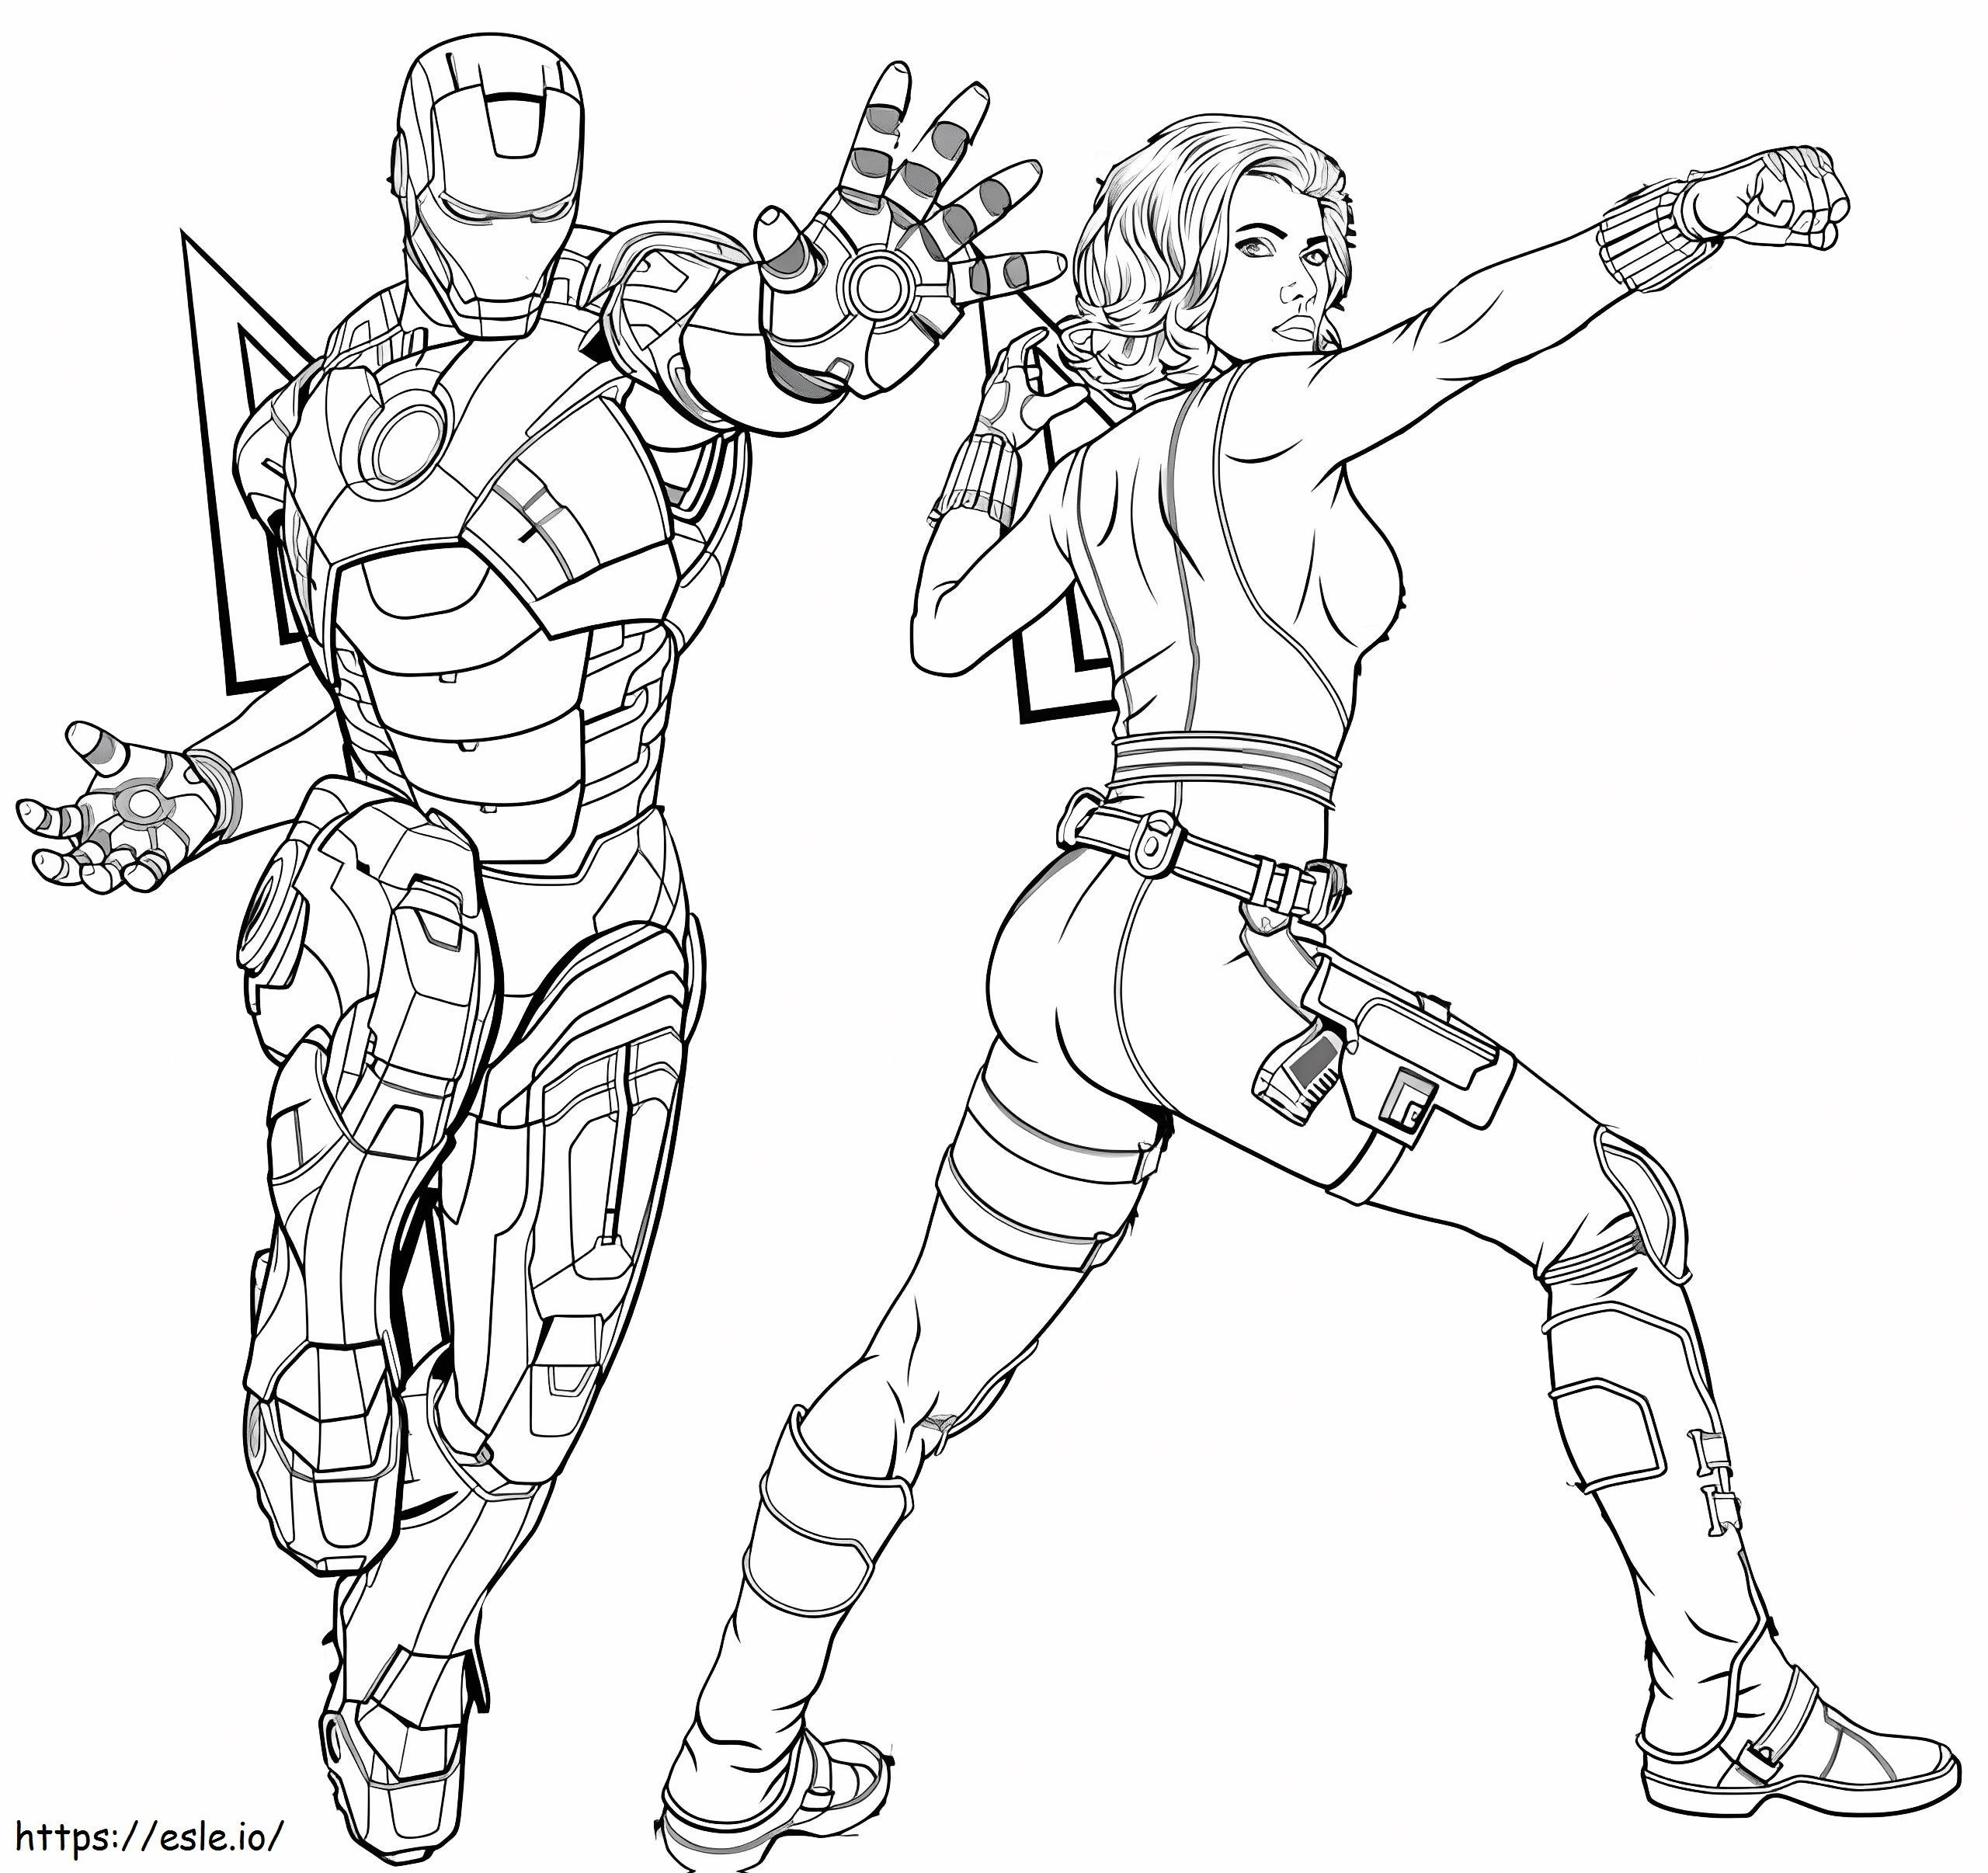 Black Widow And Man Of Steel coloring page